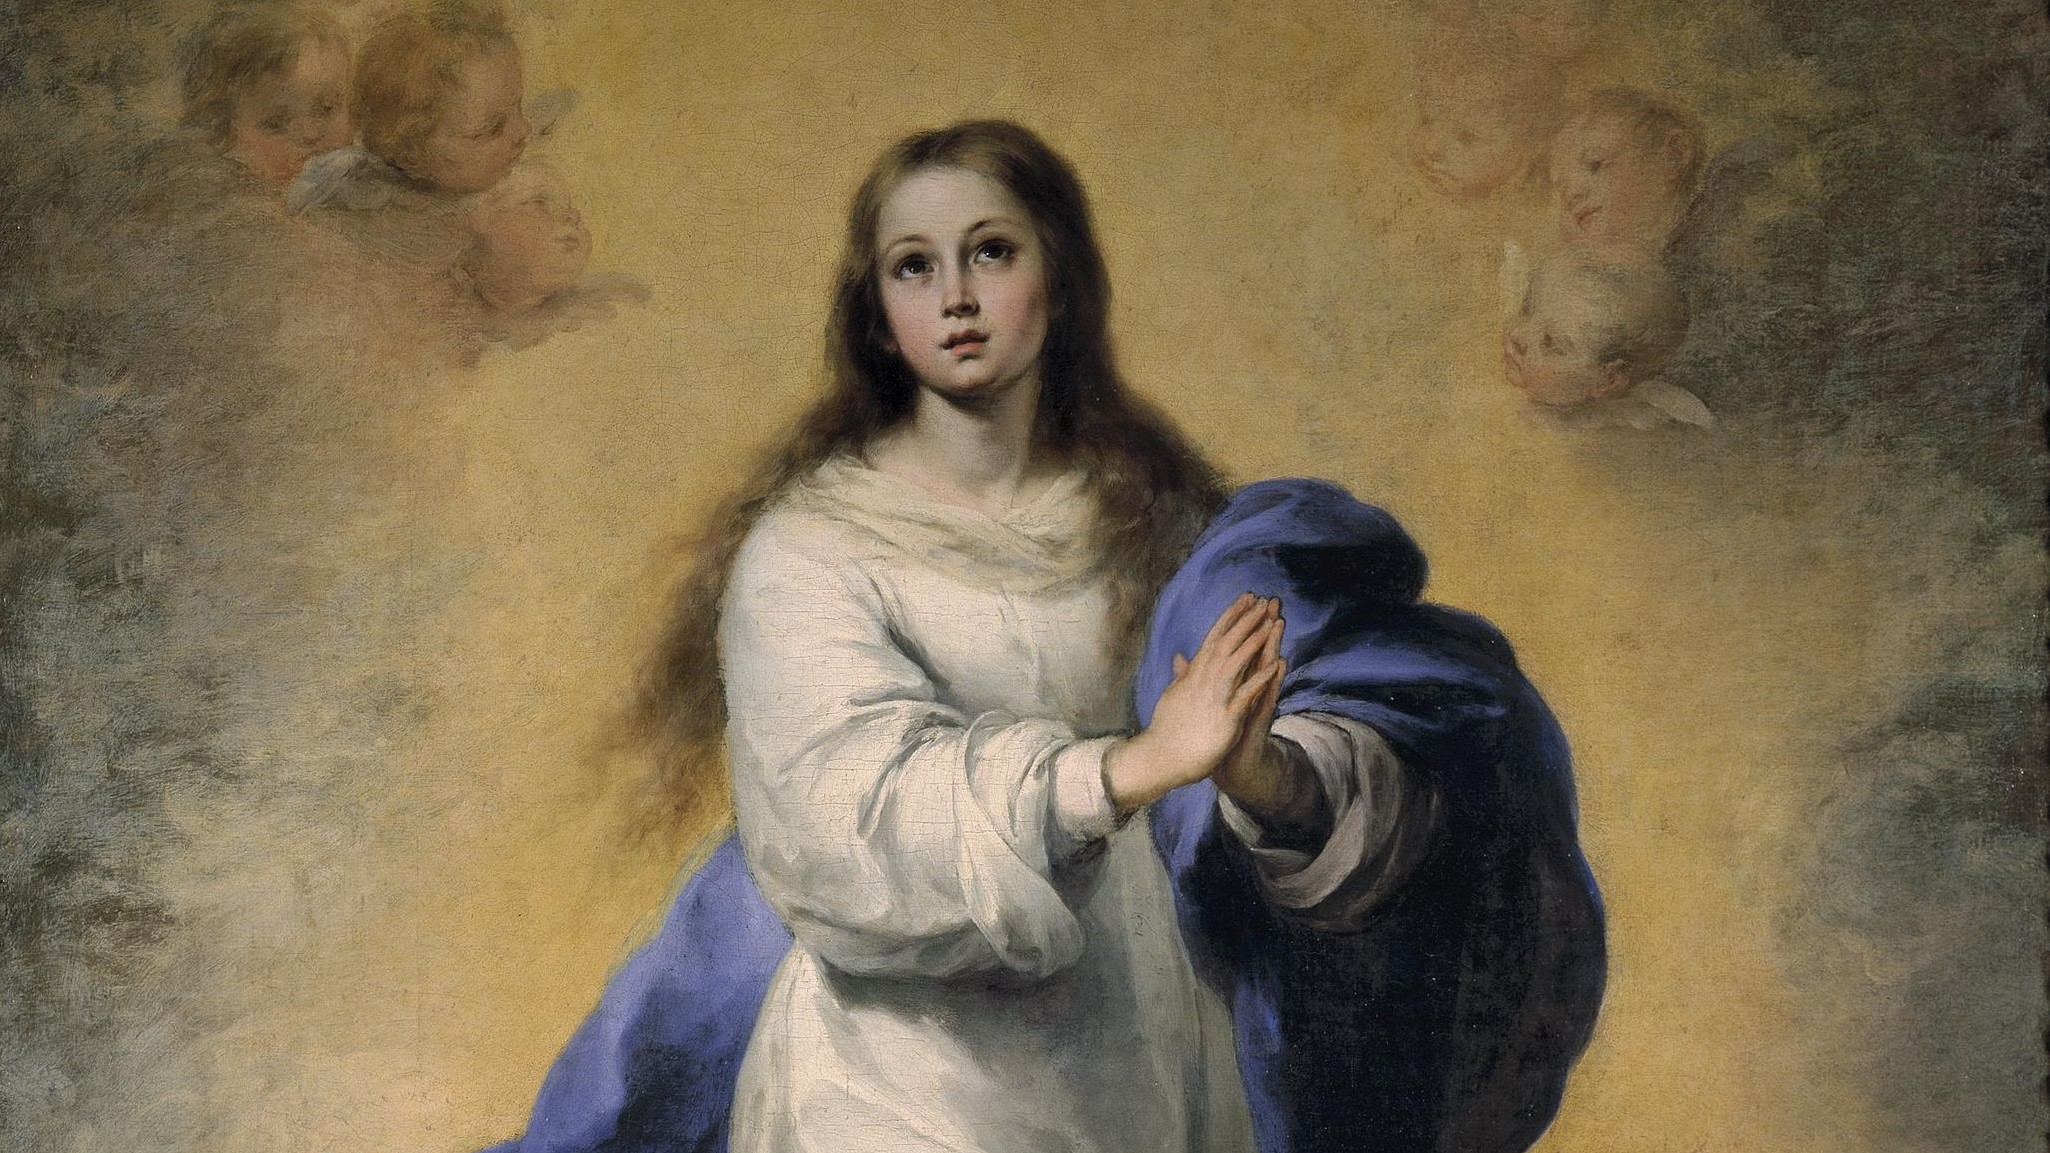 Q&A: Is Mary an Obstacle?